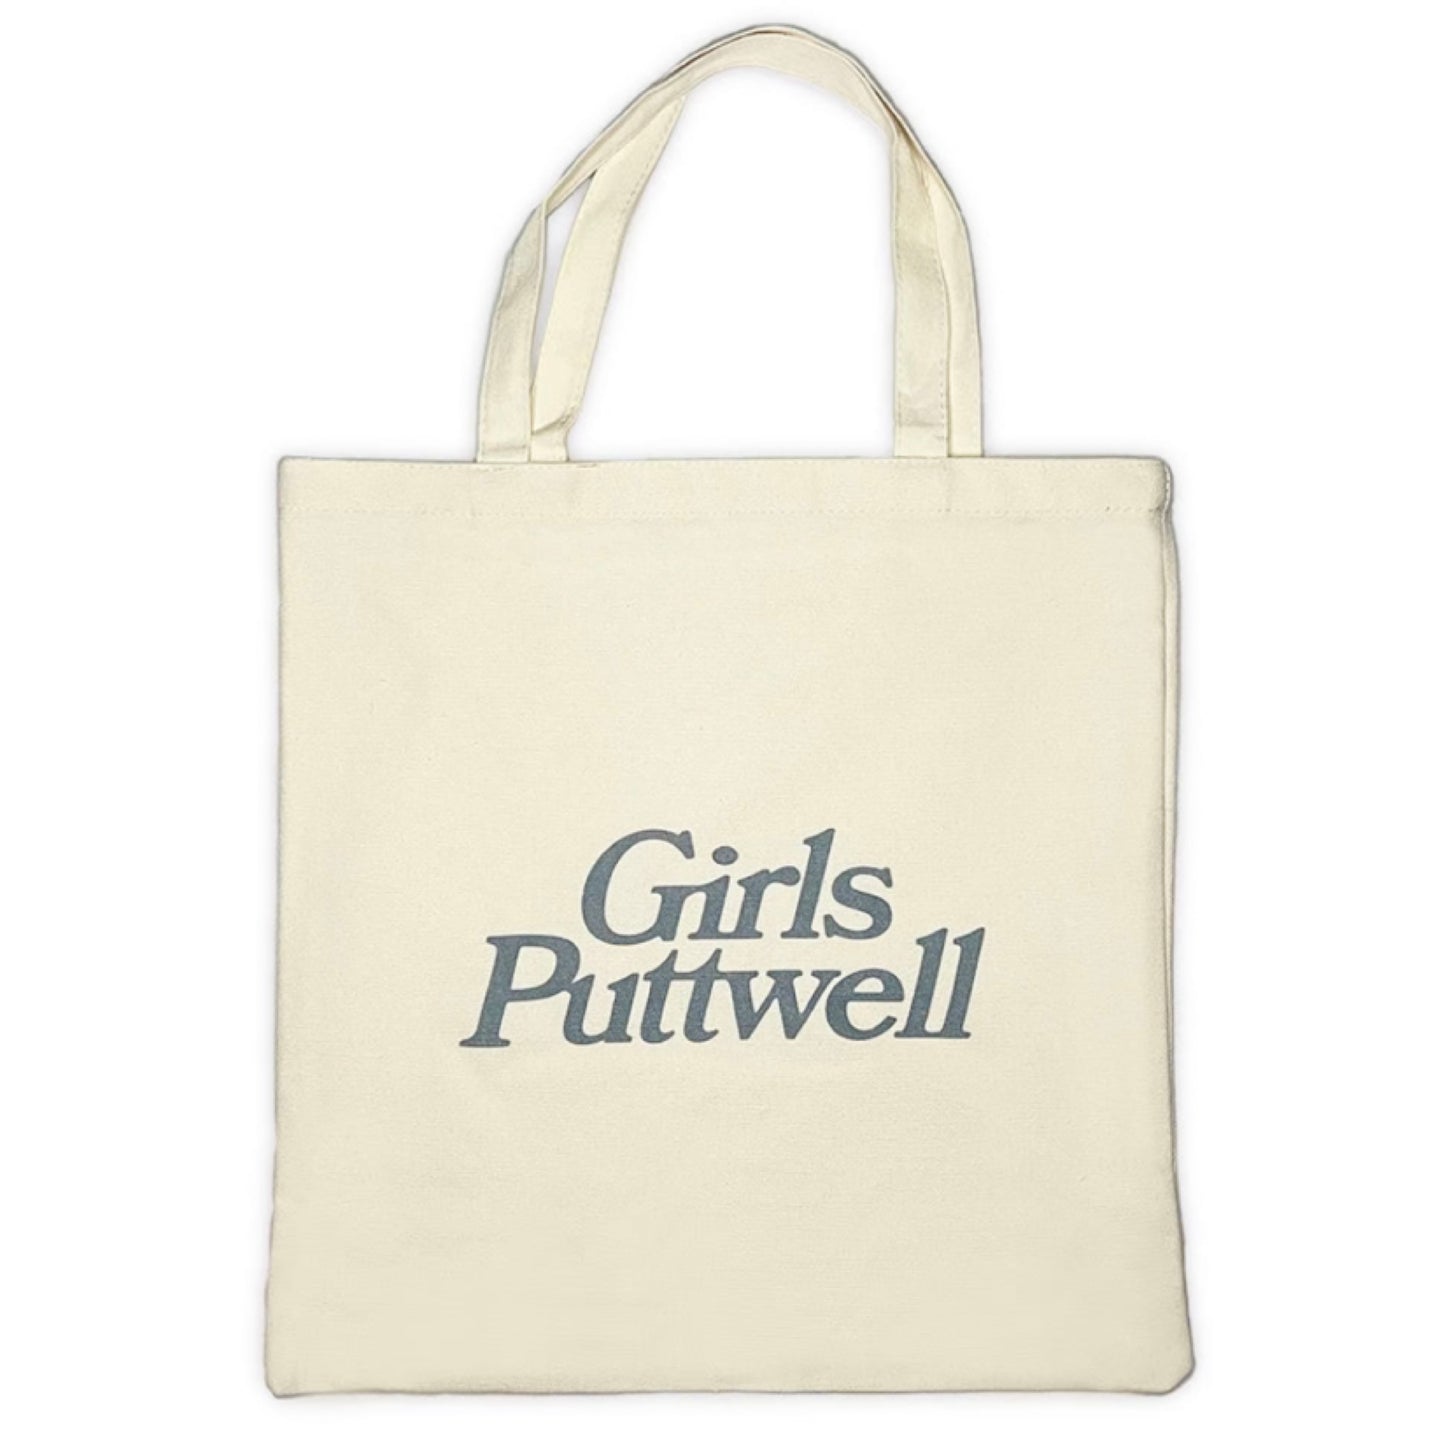 Girls Puttwell Canvas Tote